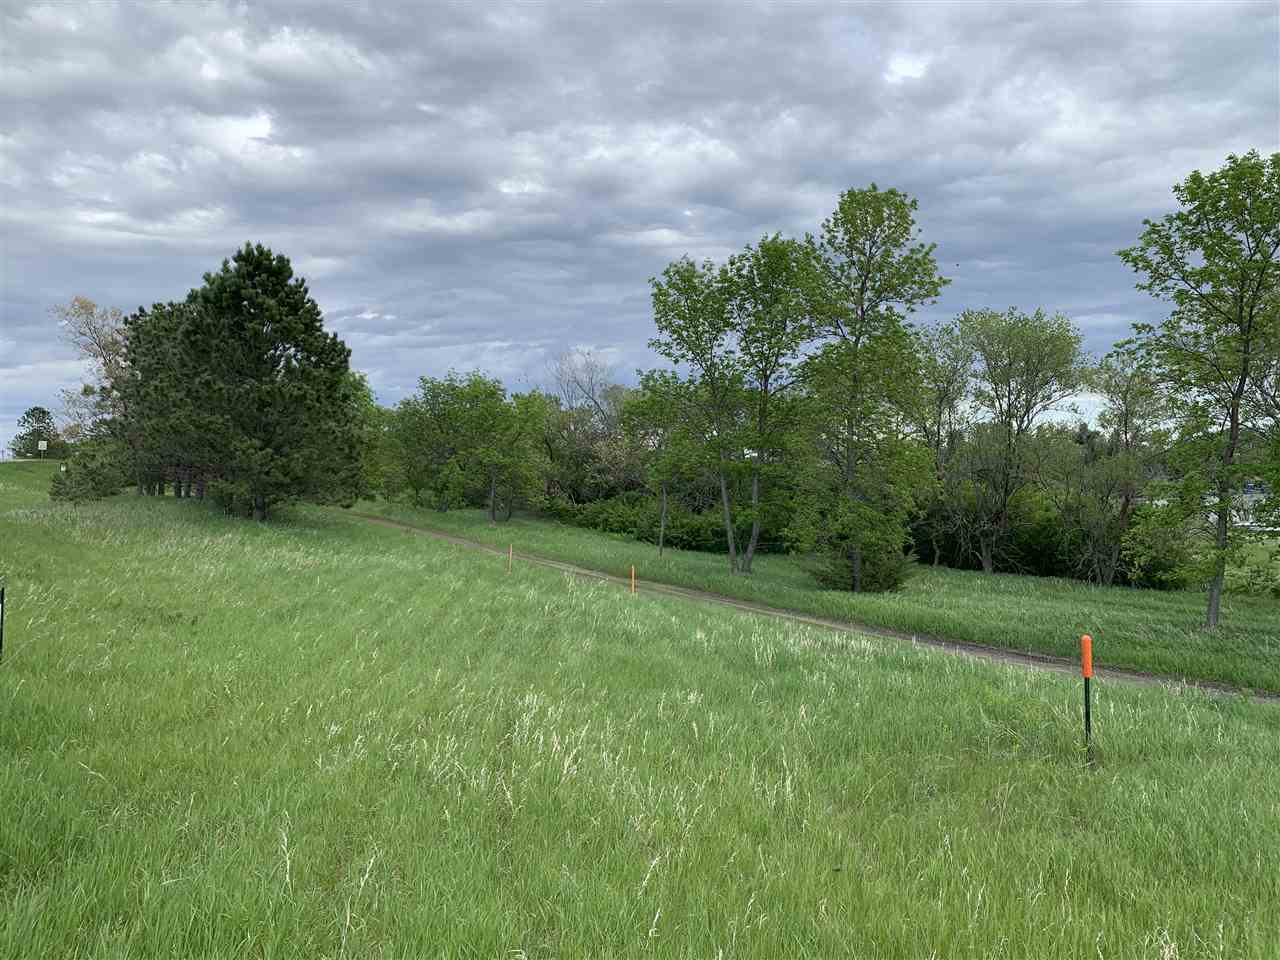 Property Photo:  *Unassigned Lot 4, Block 1, Rice Lake Park 3rd Addition  ND 58779 